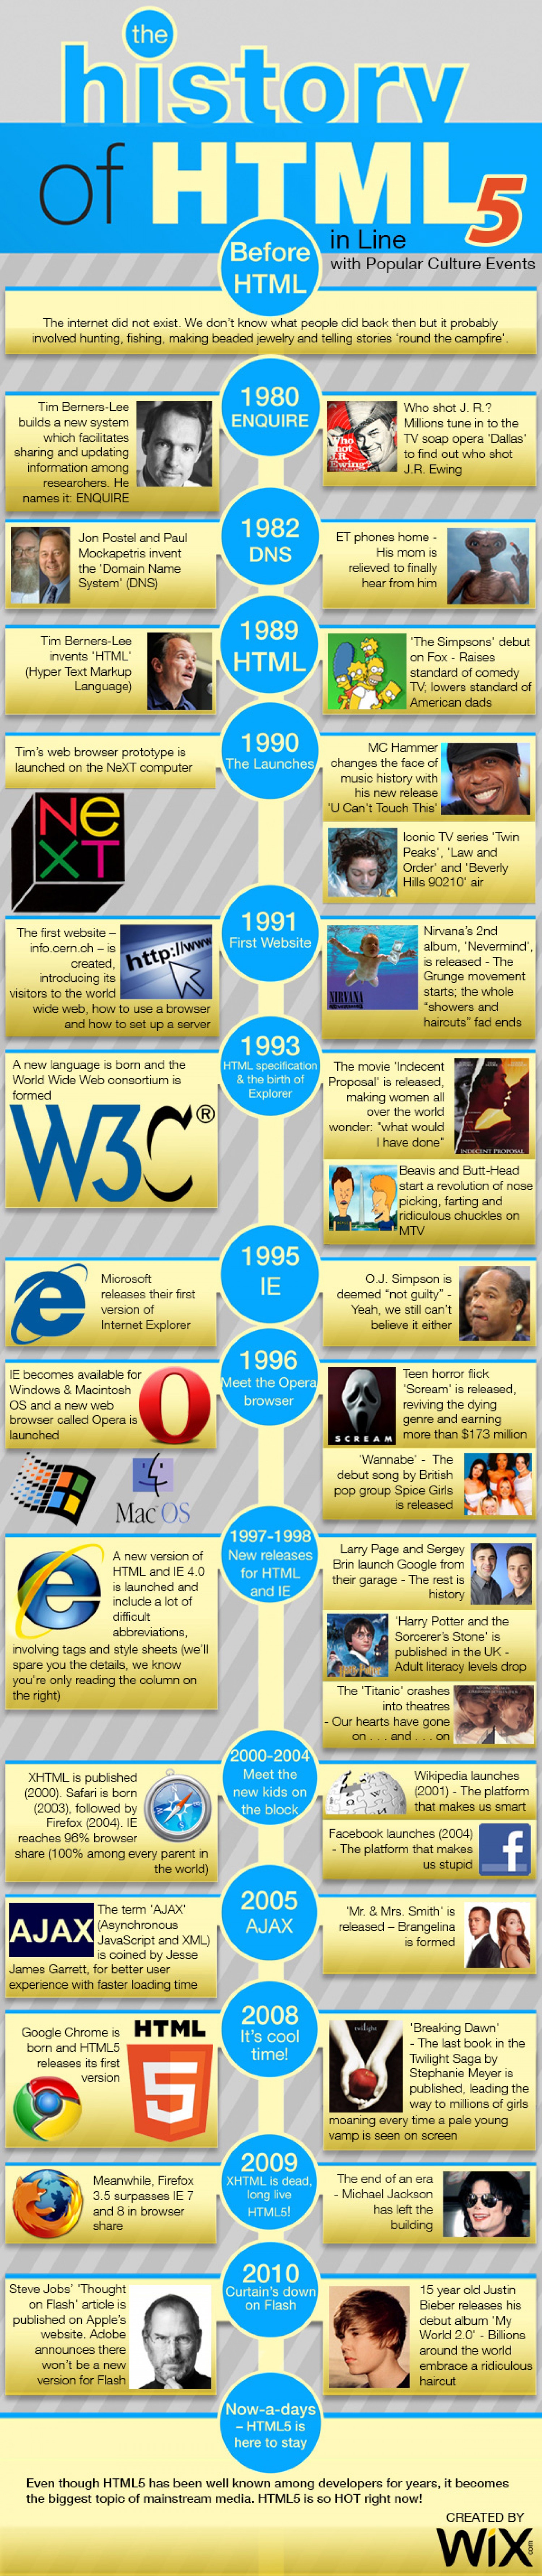 The History of HTML5 in Line with Popular Culture Events Infographic